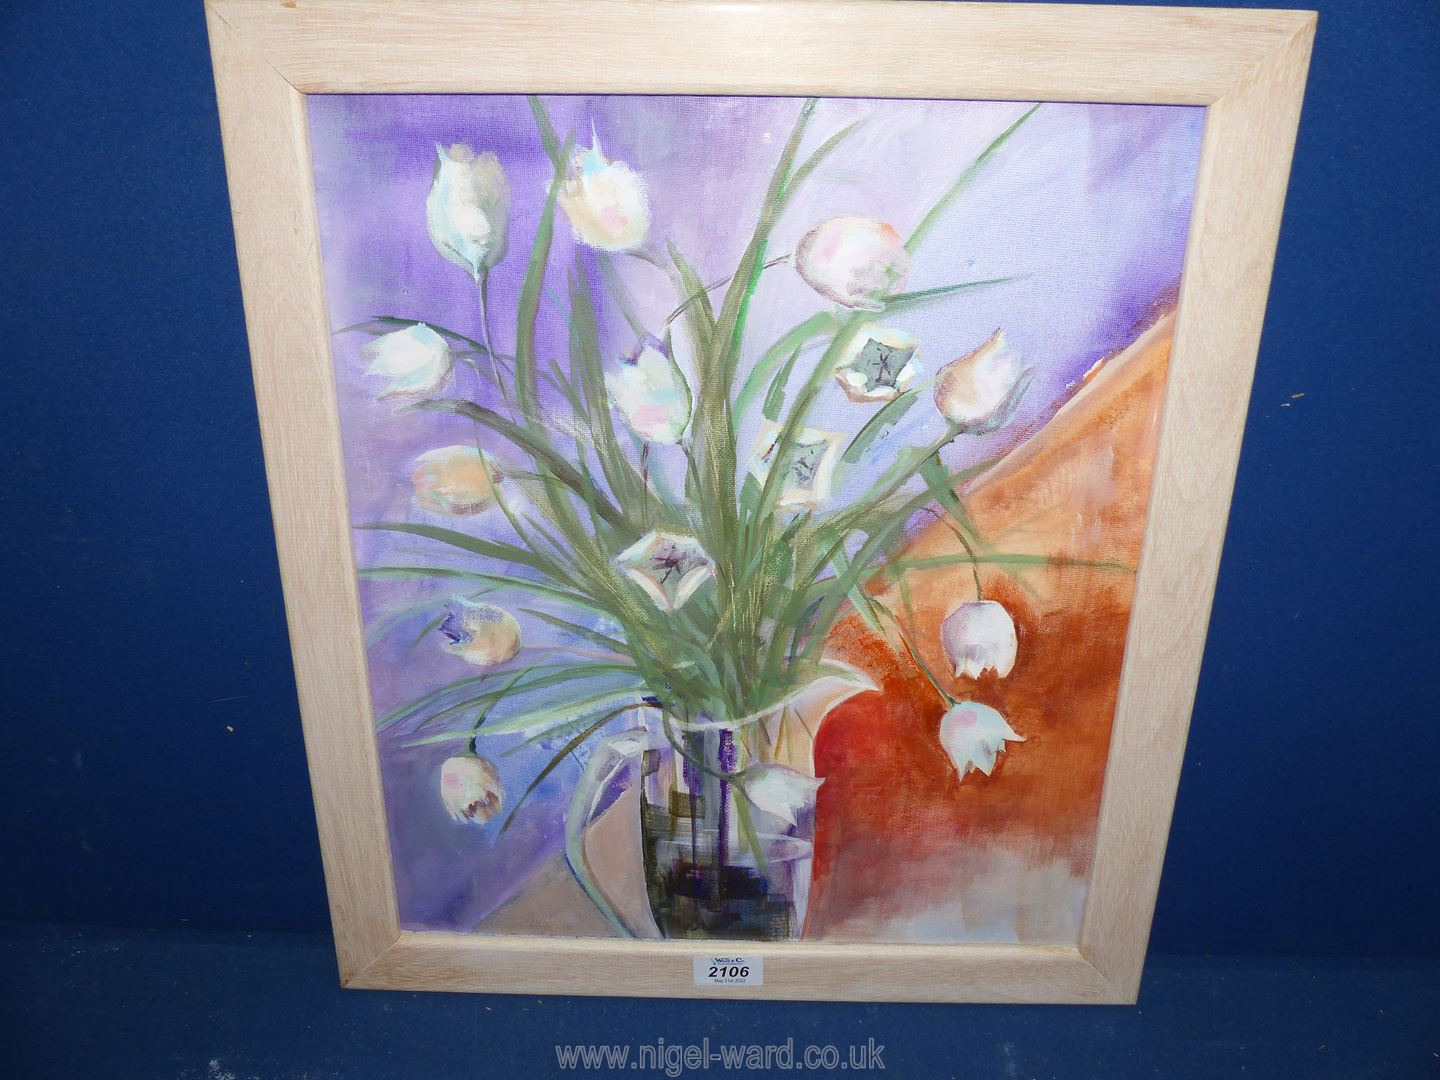 A framed Acrylic painting, label verso "Droopy Tulips", Jennifer Catterall, 17 1/2" x 20".